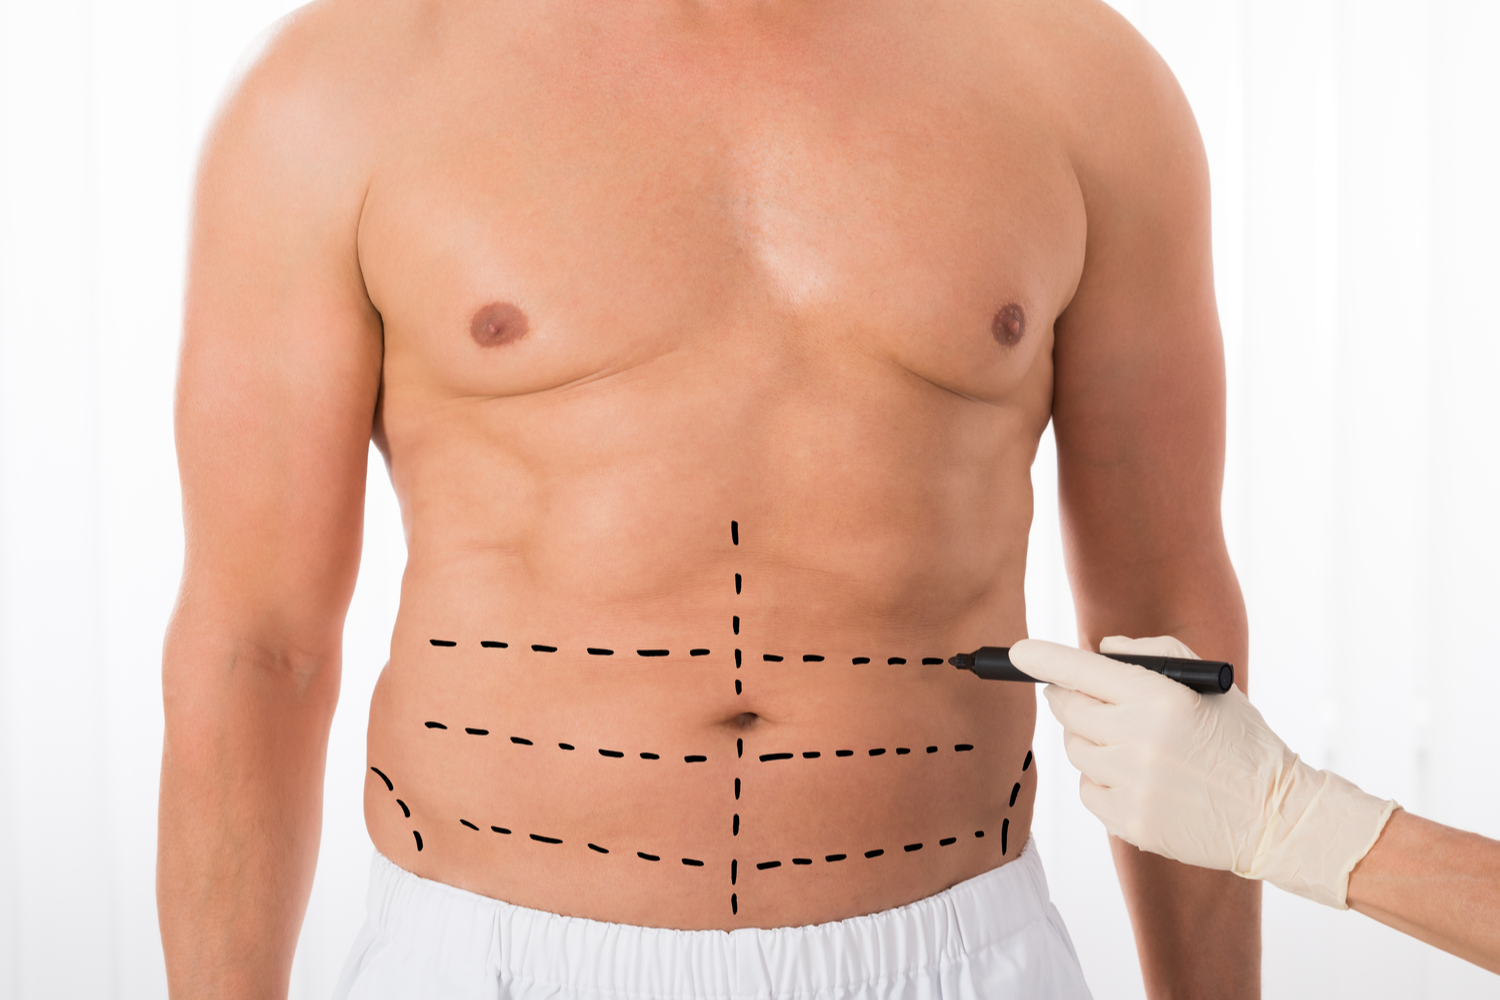 Liposuction for Men: A Growing Trend